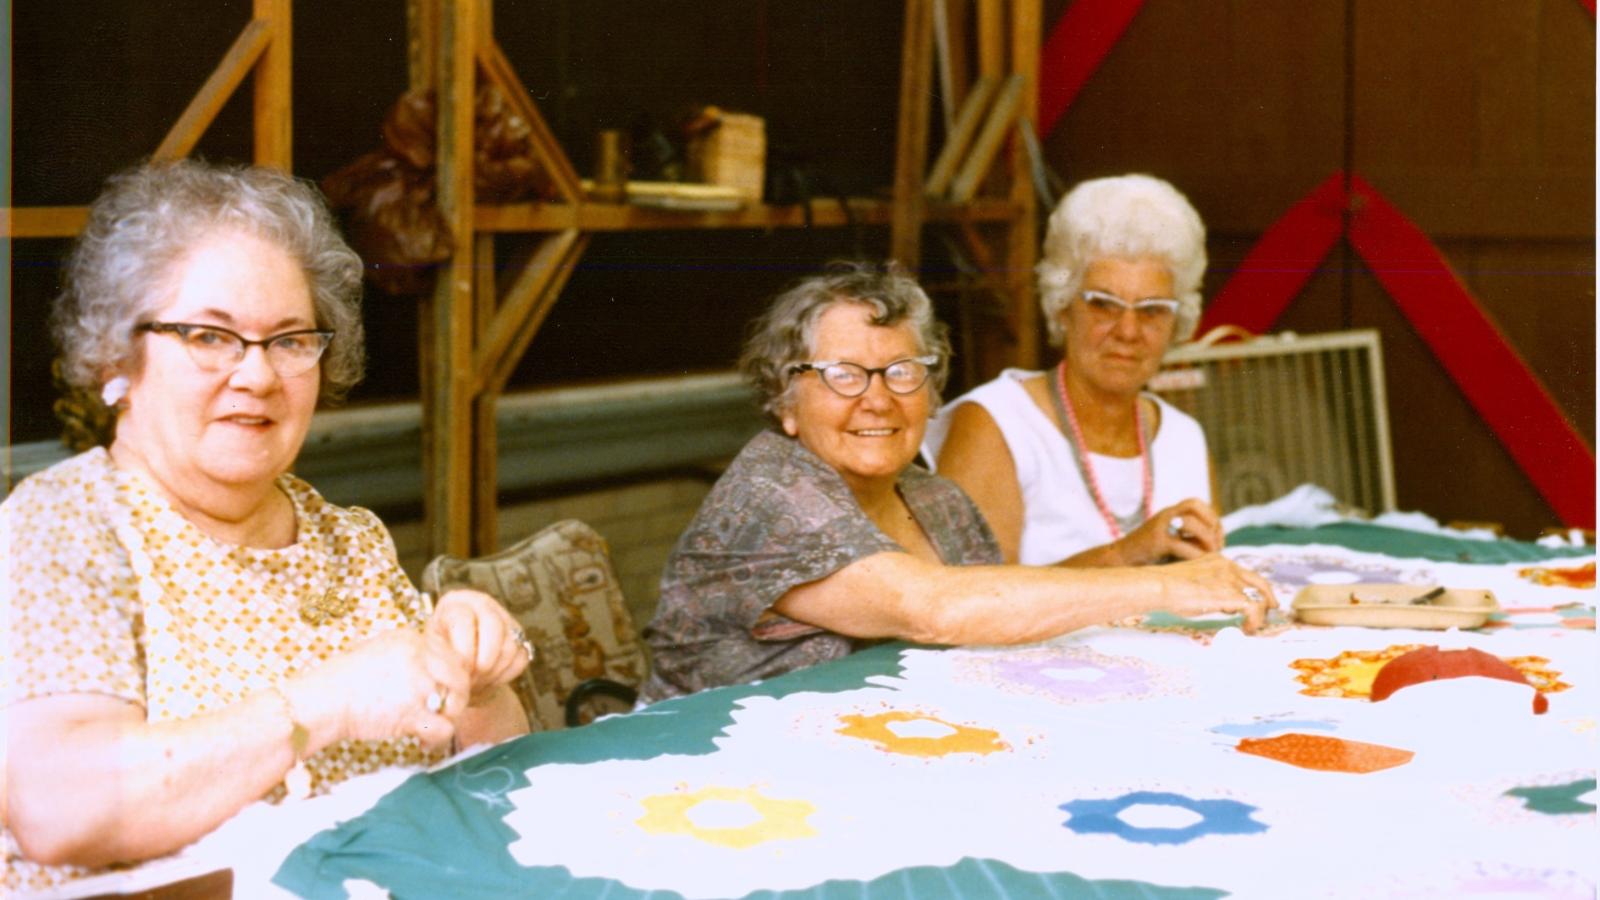 Thora Blackwood (center) and friends, quilting a quilt that she pieced. Pomeroy, Ohio, 1977.